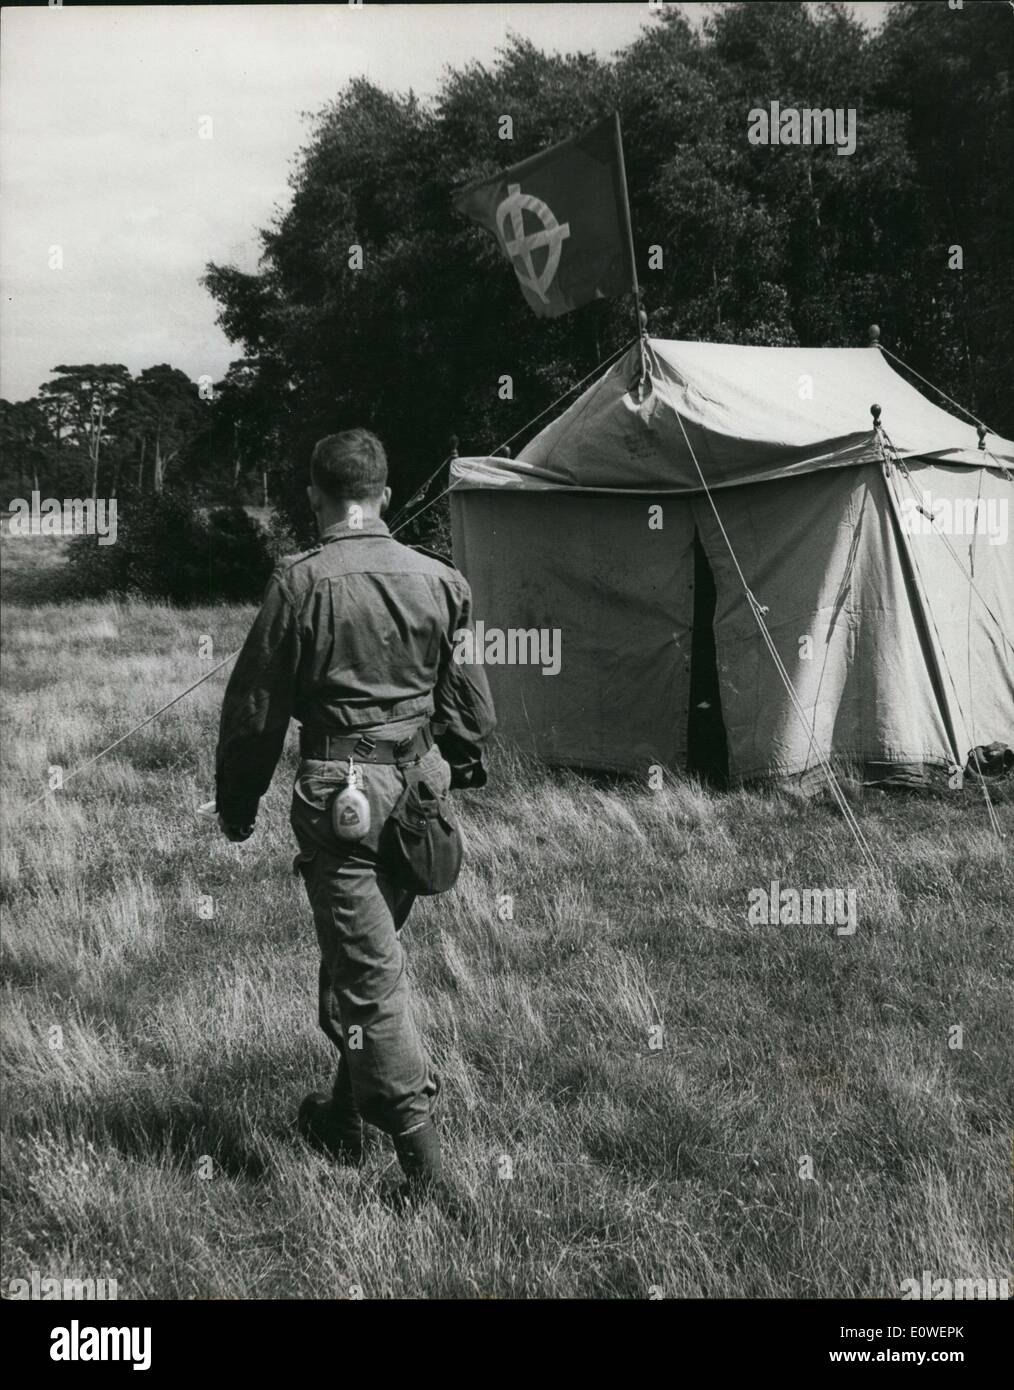 Aug. 08, 1962 - British Nazis rally in 1962: Followers of the British national party (Noe-Nazis) were attending a camp on the 5,000 acre estate at new ford. near swaffha, Norfolk, belonging to their president. A red flag with a white caltic cross fluttered on a mast and everything had the look of a peaceful summer camp. But inside, members (among them German and Italians) wave learning how to deal with anti-fascists when they hold their rally in Trafalgar so, next month. Photo shows a member in paratrooper uniform, walks past a tent with the movement flag. Stock Photo